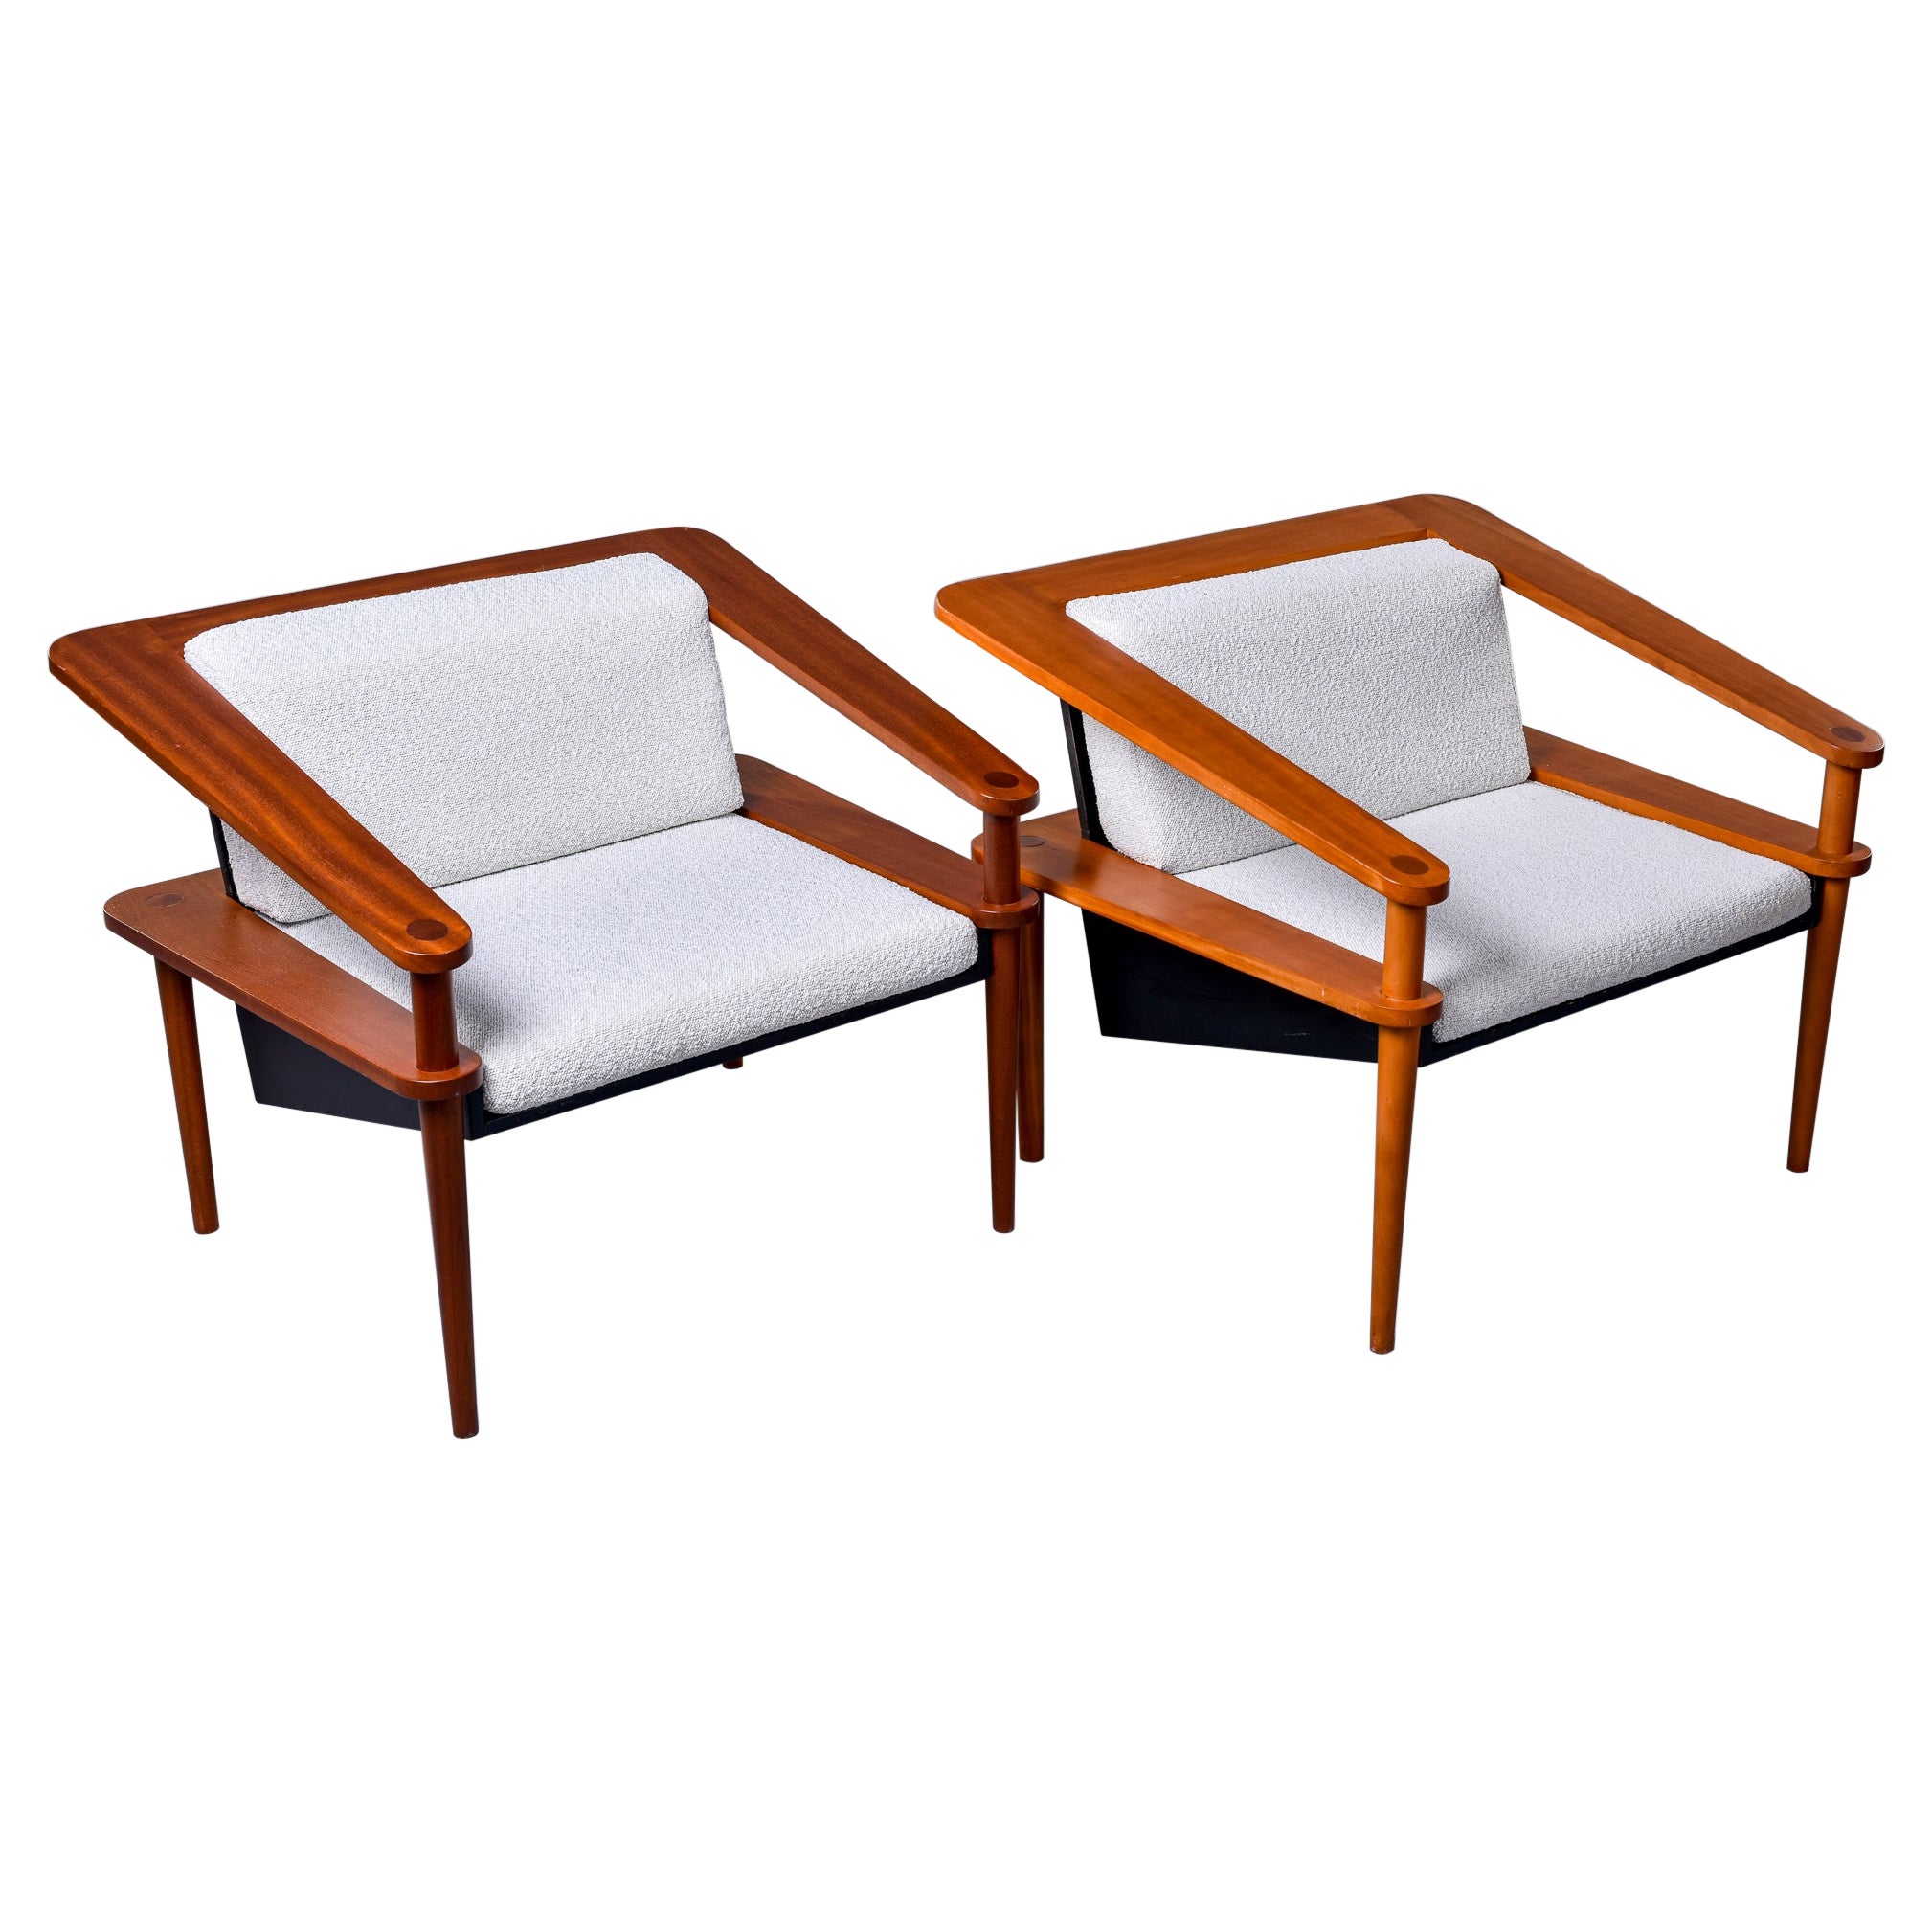 Pair Unusual Mid Century Sculptural Cube Chairs with Teak Frames For Sale